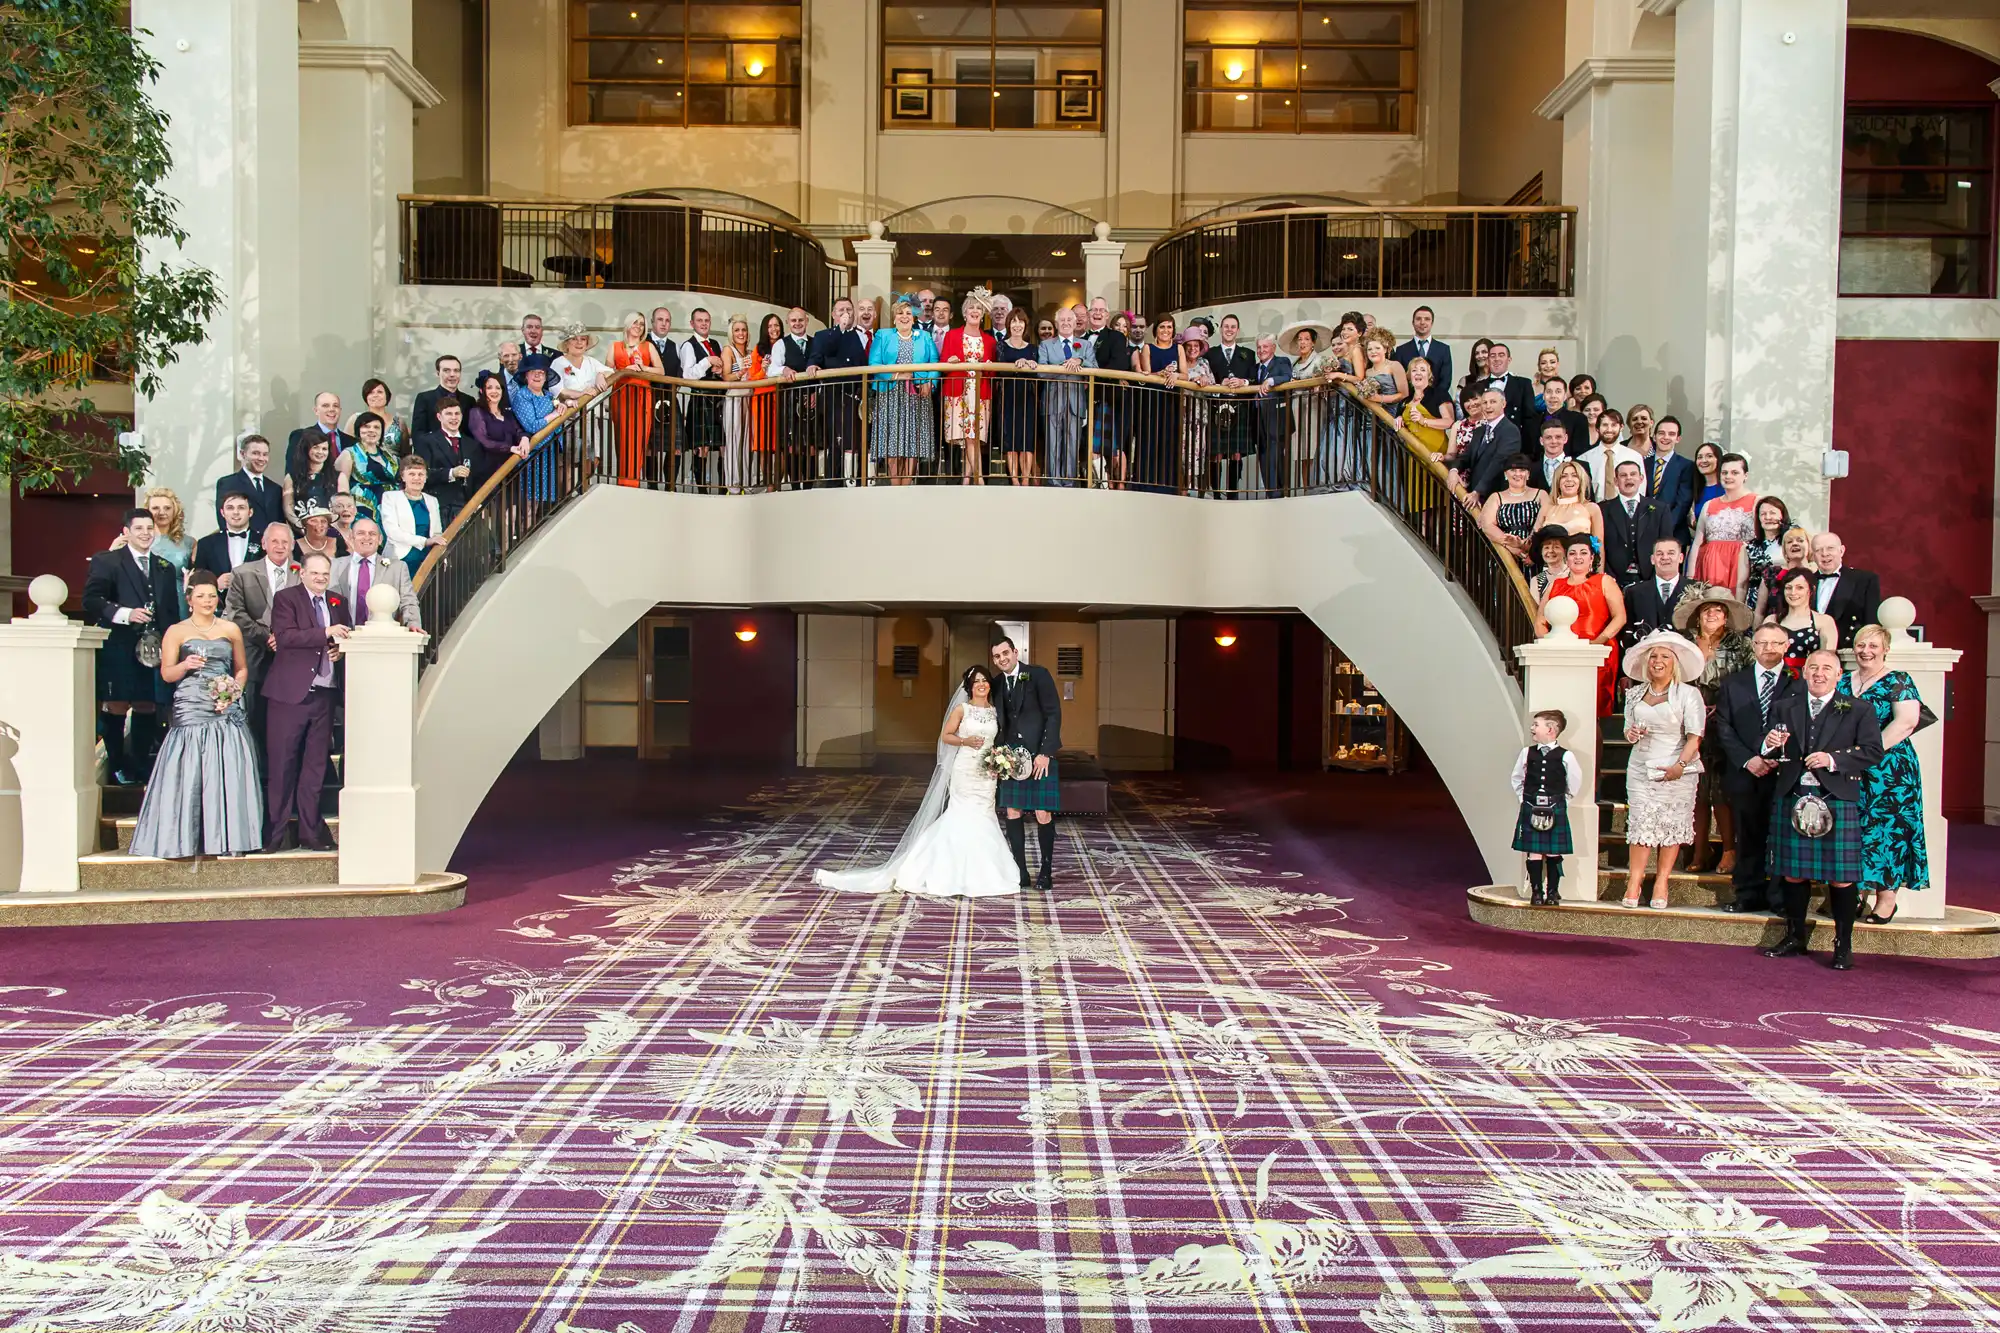 A large wedding group photo in a grand hotel lobby with the bride and groom centered on the floor, guests assembled on surrounding staircases and balcony.